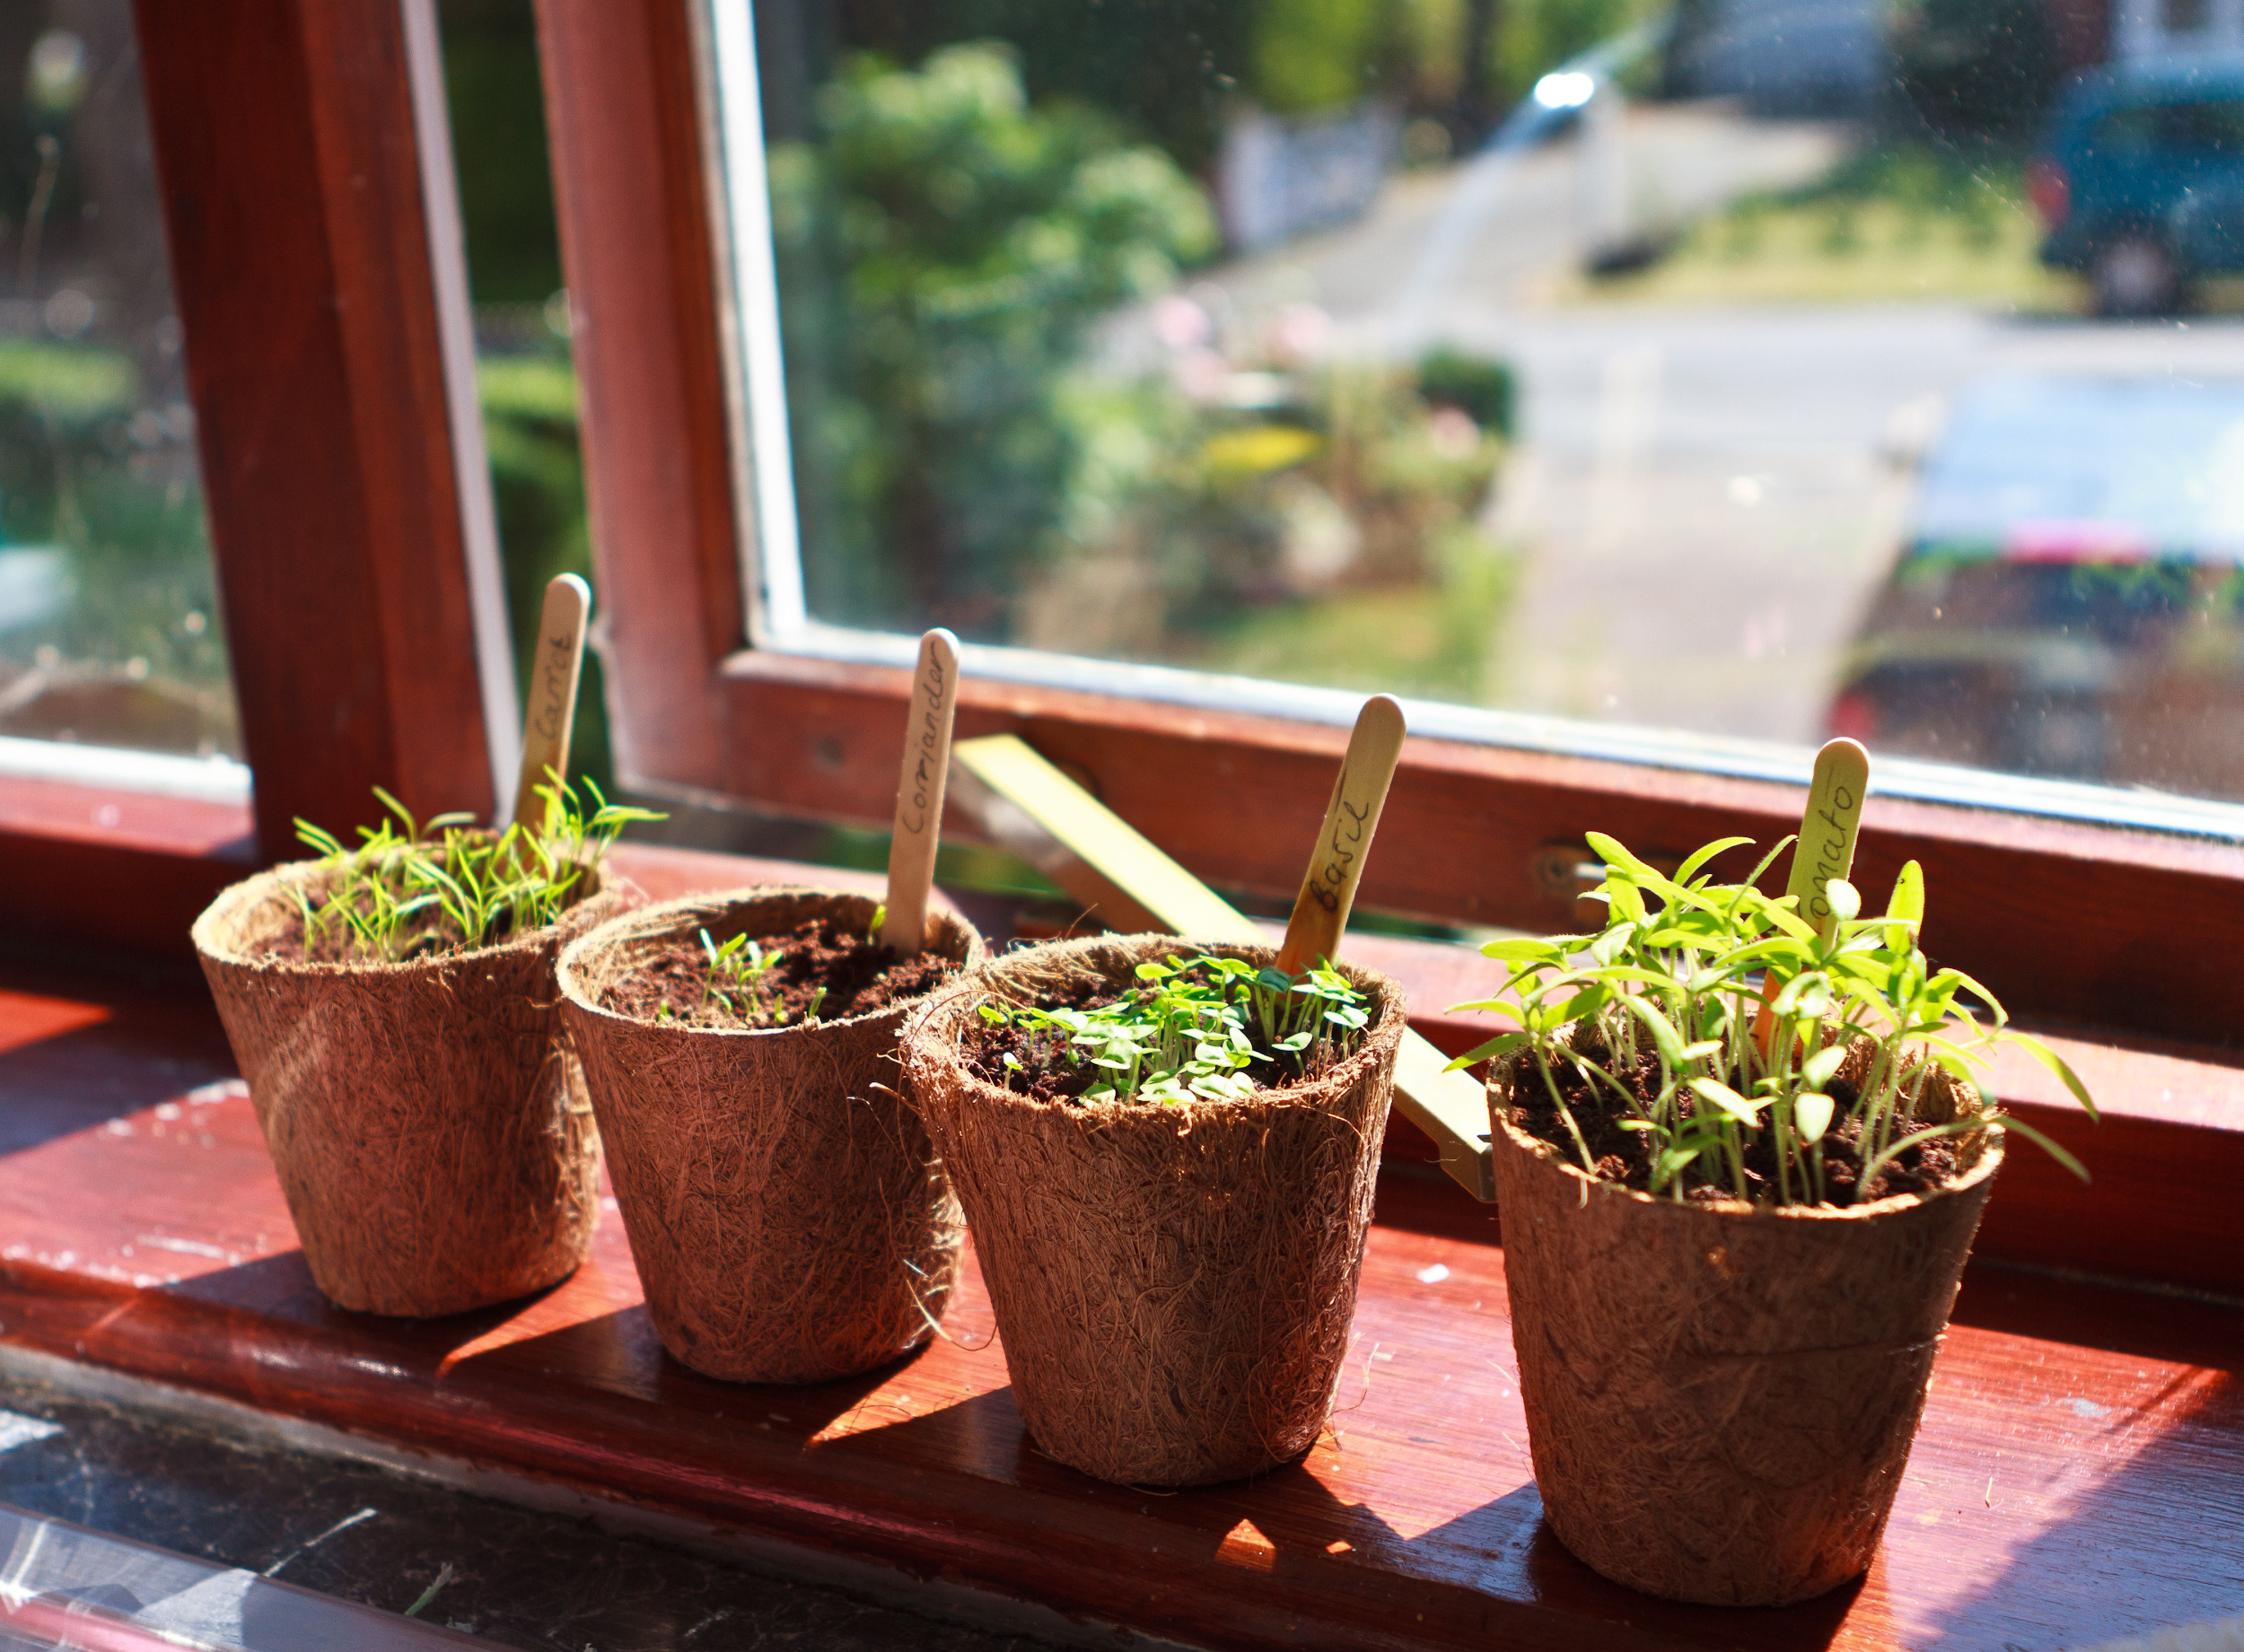 7 Tips From Experts On Windowsill Herb Garden - What Herbs Should Beginners Grow 